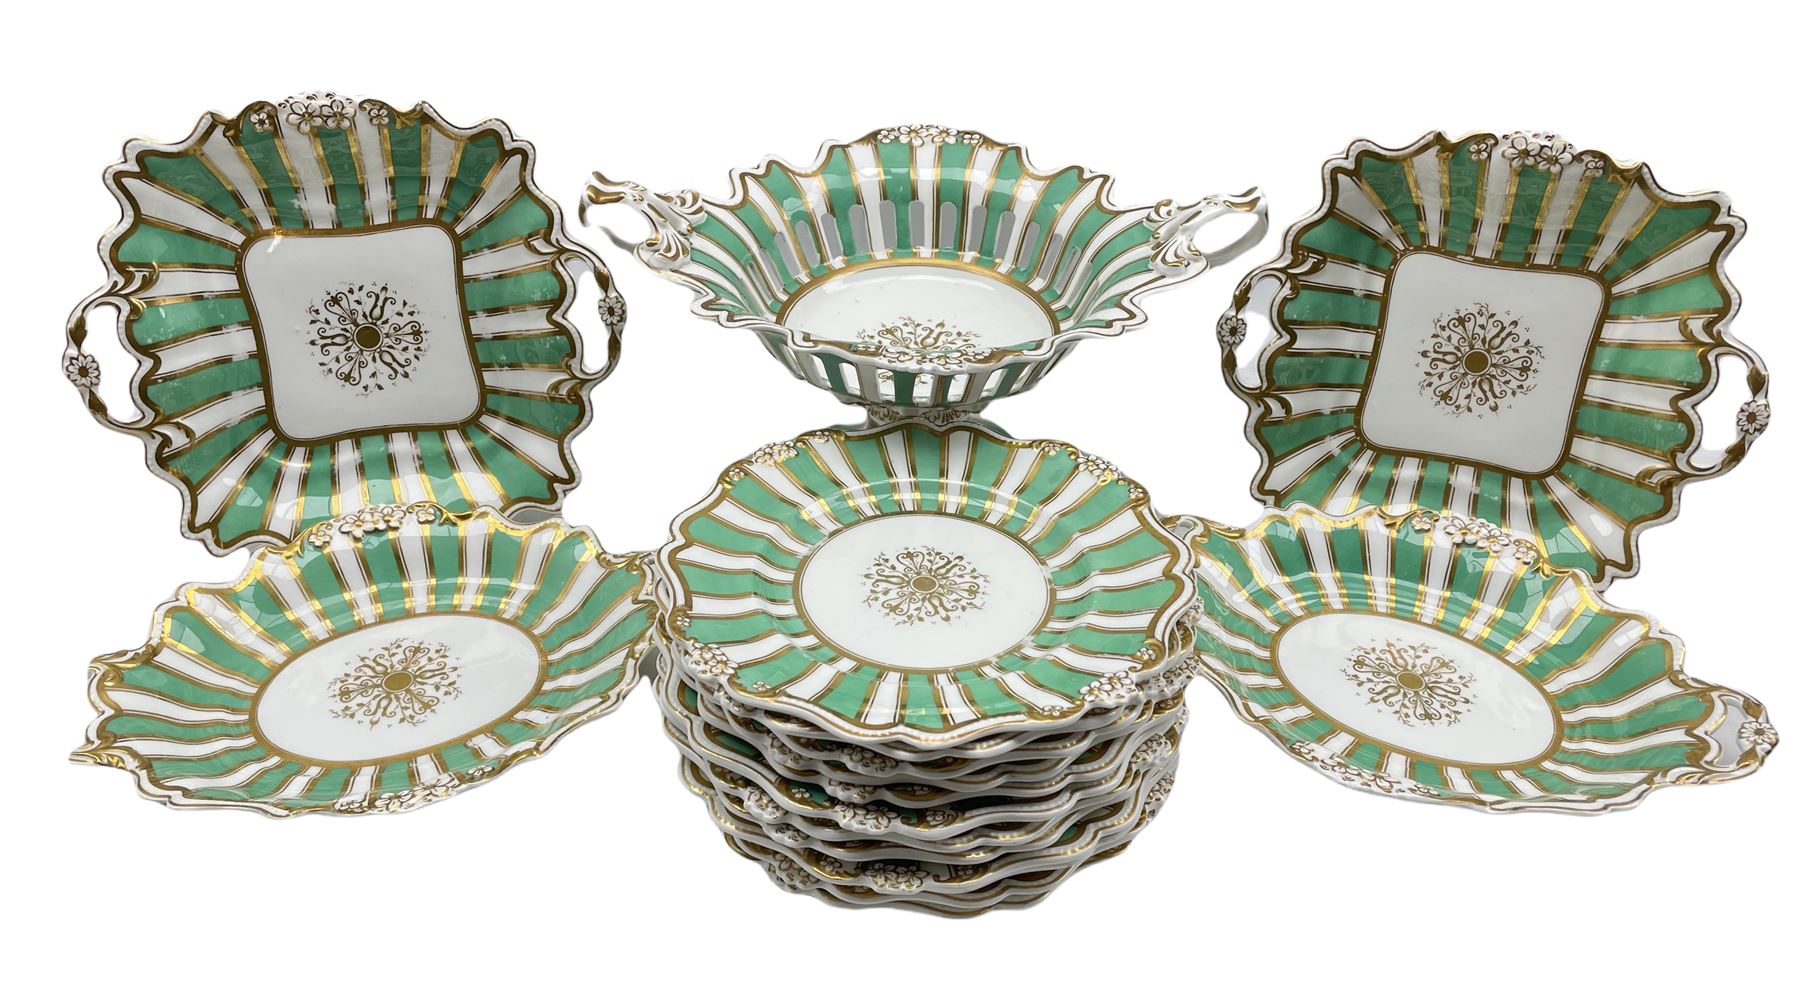 Victorian porcelain dessert service decorated with green and plain striped borders